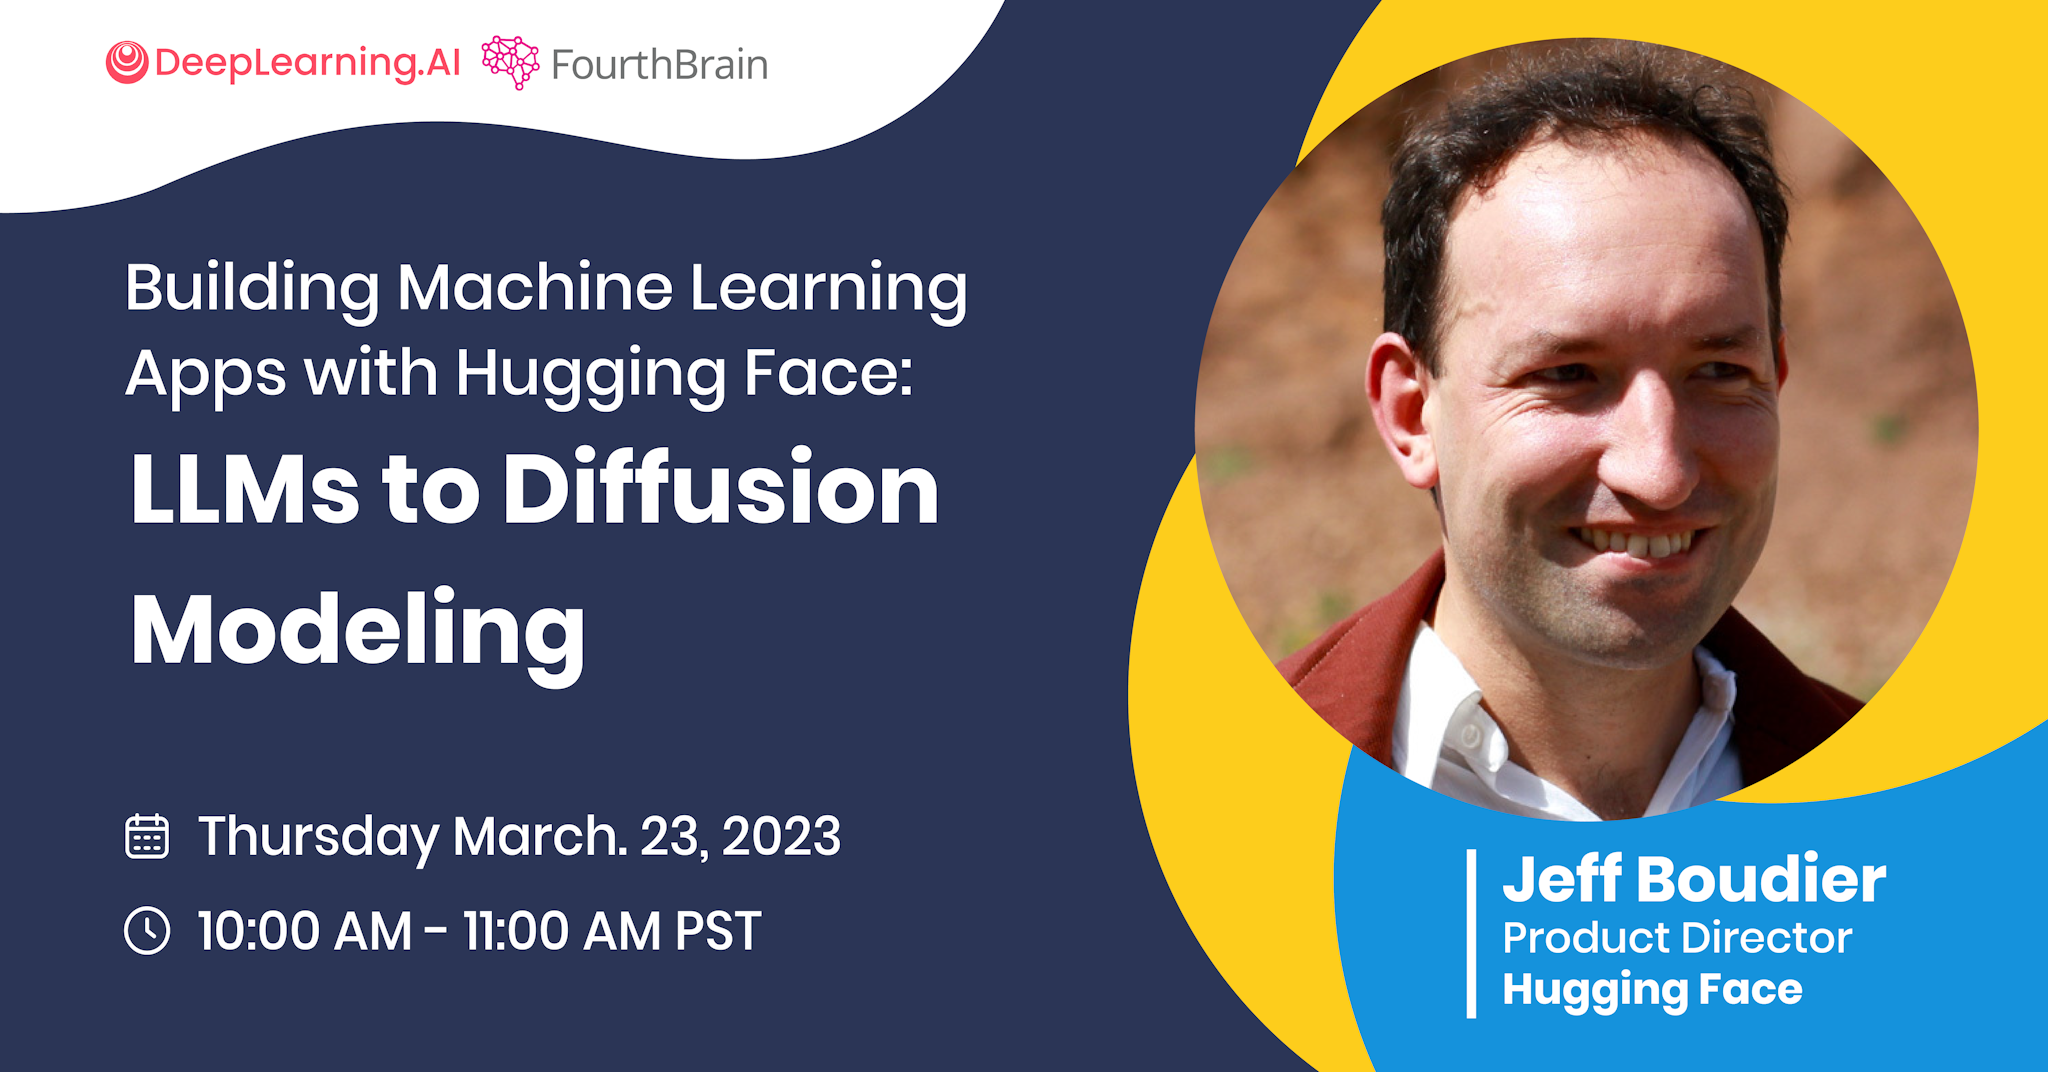 Building Machine Learning Apps with Hugging Face:LLMs to Diffusion Modeling